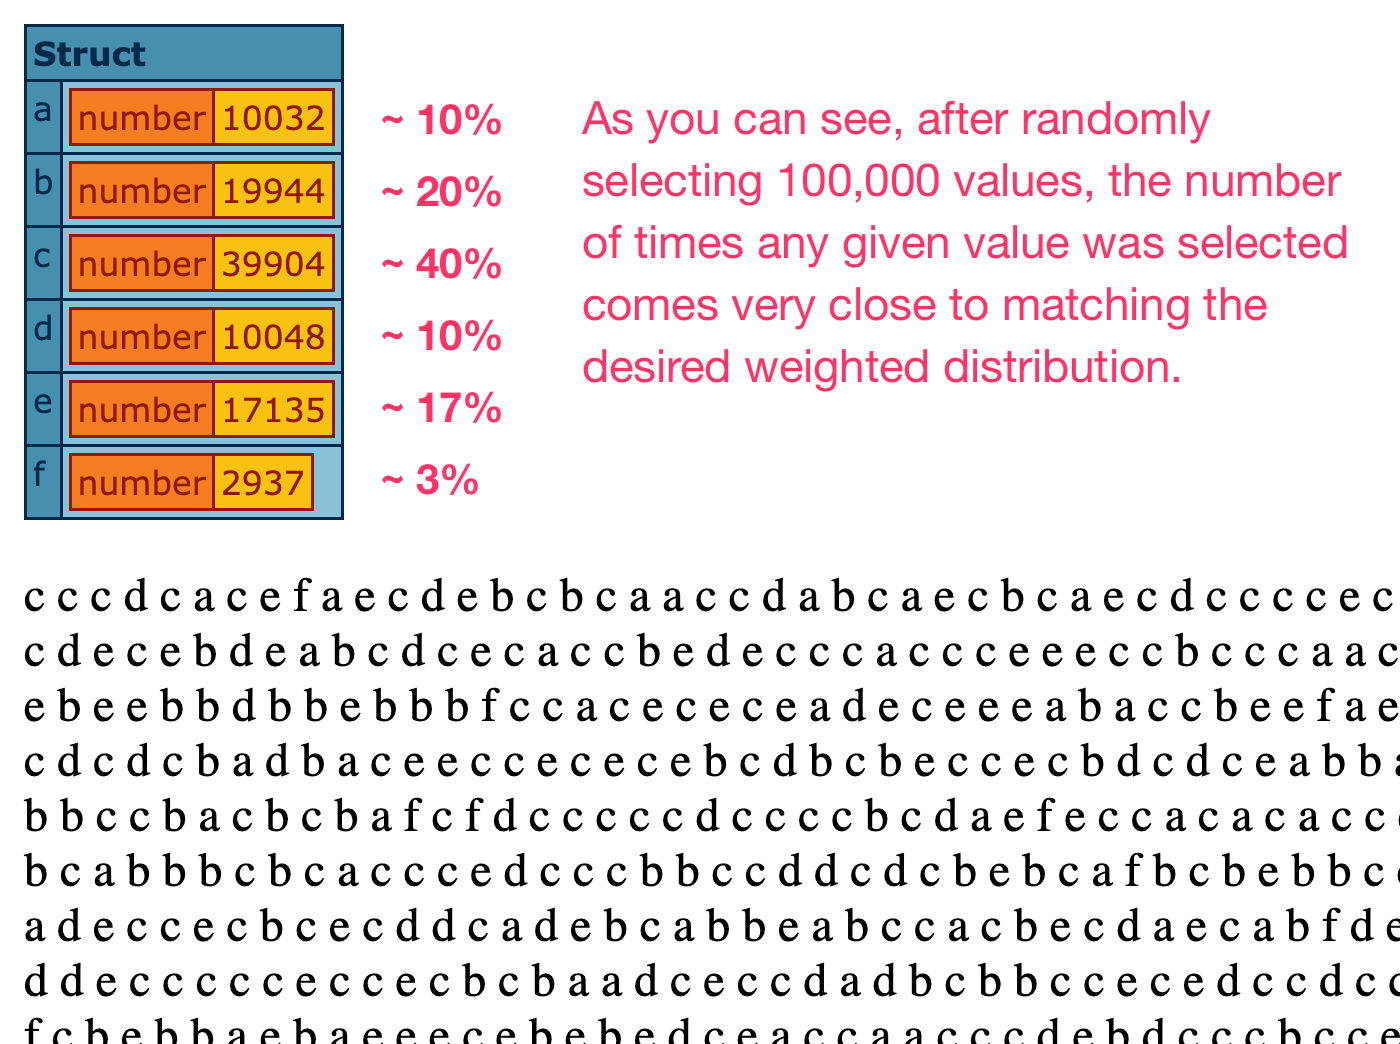 Results of 100,000 random selections showing that the number of selections of each value roughly matches the desired weighted distribution.